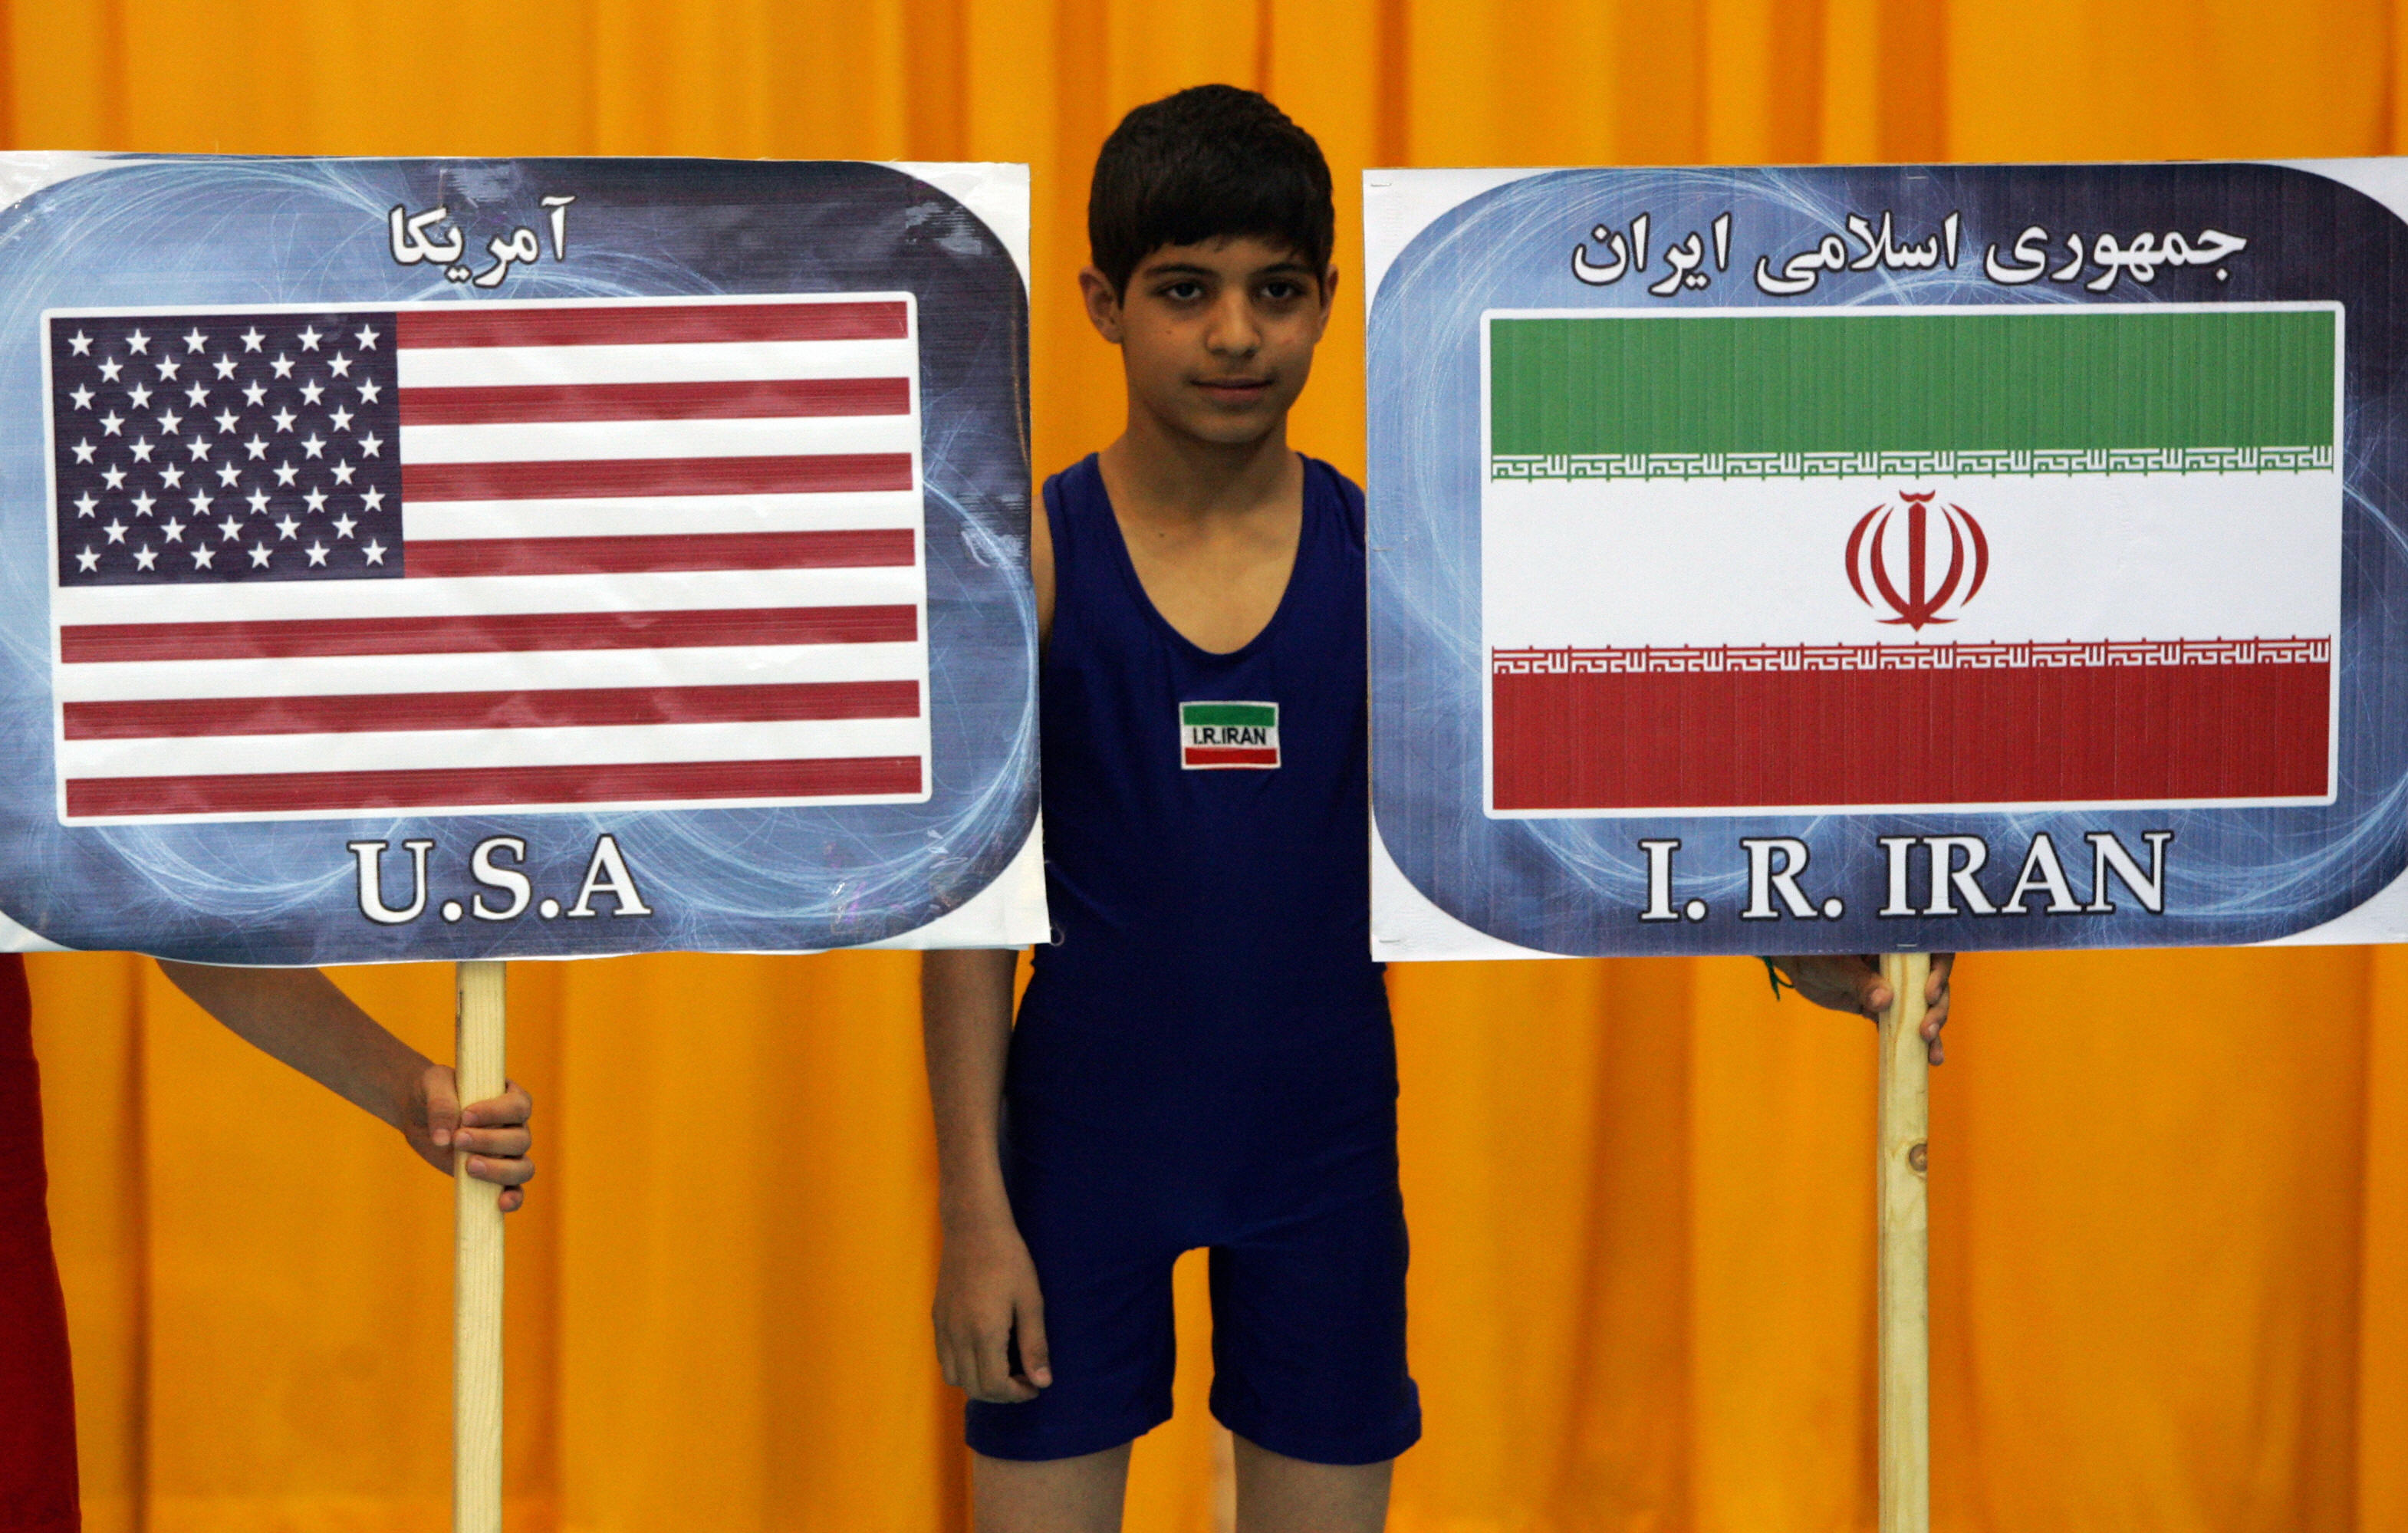 BEHROUZ MEHRI/AFP/Getty Images. An Iranian boy stands between the placards of Iran and United States during the opening ceremony of 29th international 'Takhti Cup' wrestling tournament in Tehran on March 12, 2009. A US wrestling team is competing in two-day the tournament in the Iranian capital. Even though Tehran and Washington have been bitter foes since Iran's 1979 Islamic Revolution, they have at times put aside their differences in the arena of sports.